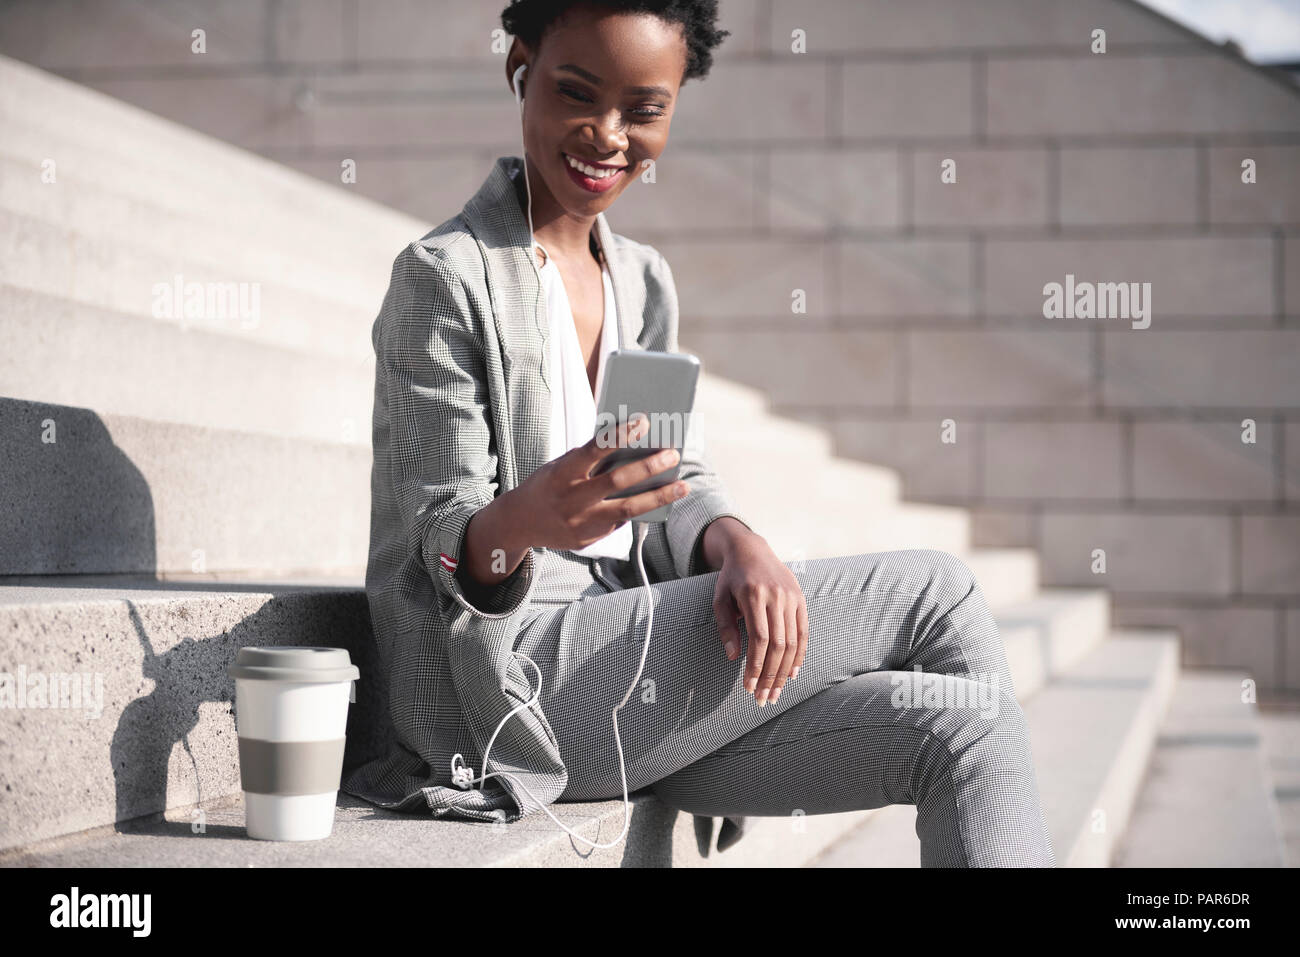 Portrait of smiling businesswoman sitting on stairs using earphones and smartphone Stock Photo